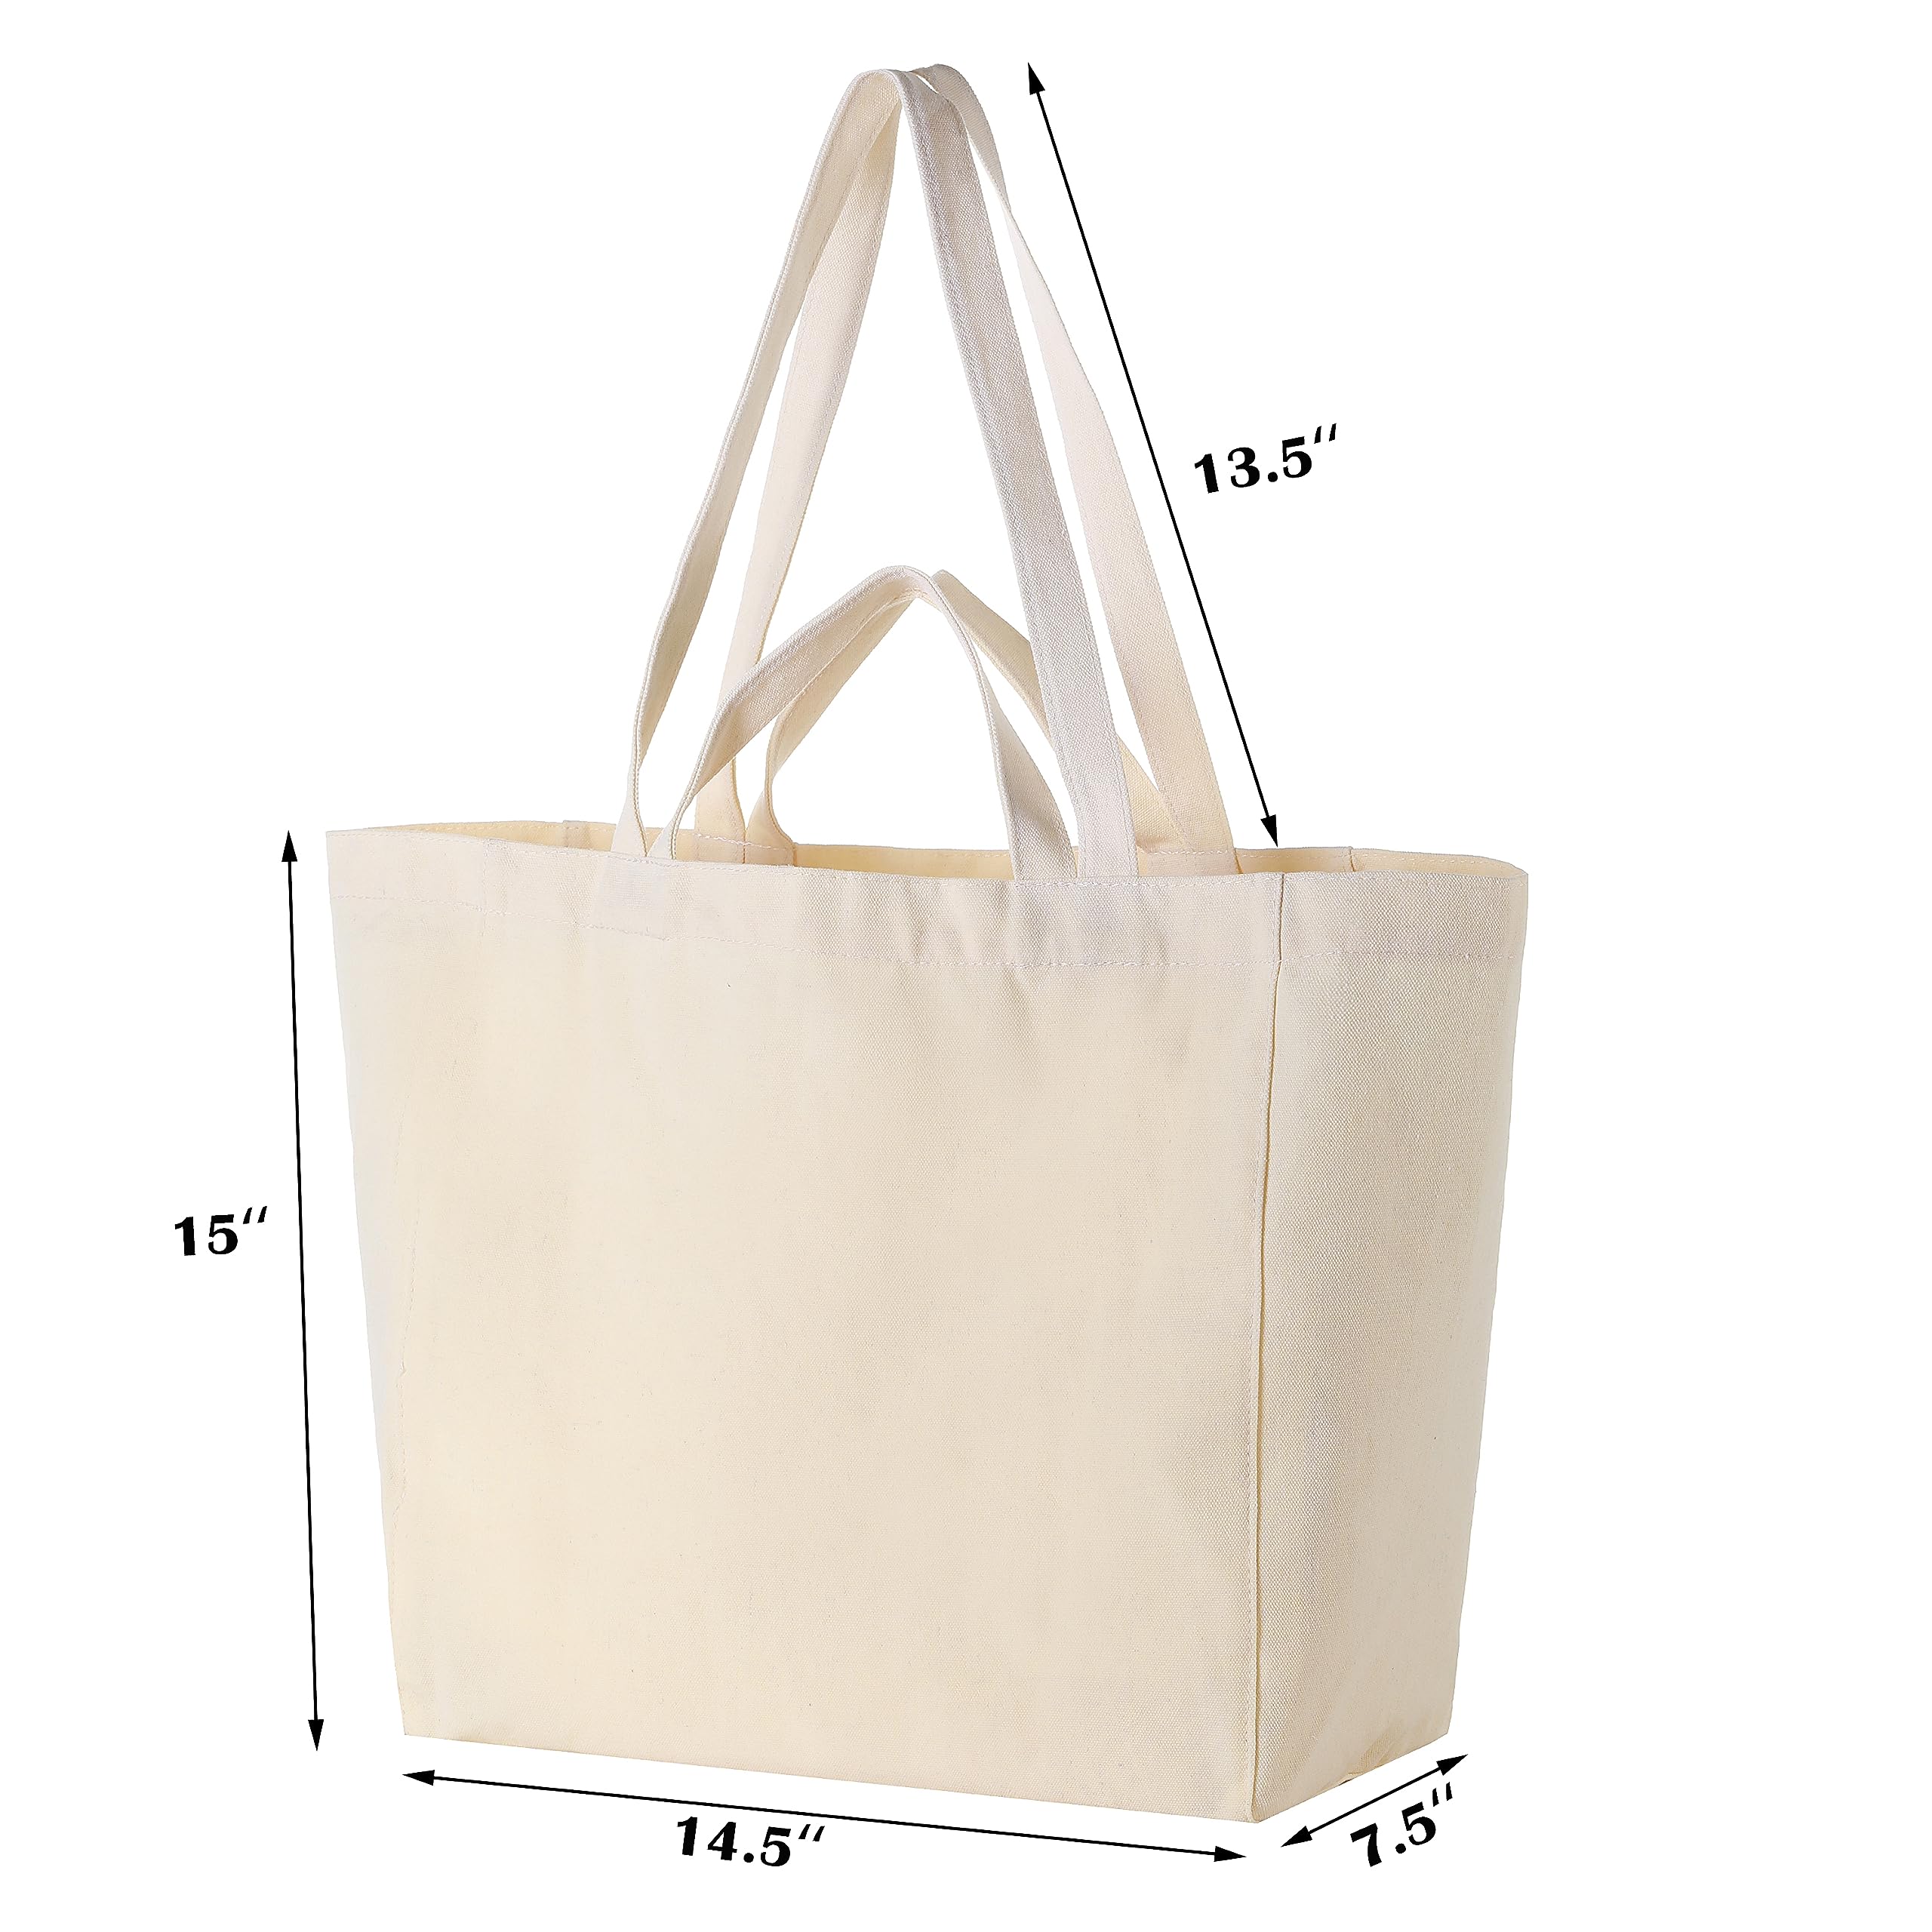 Firecolor Chic Canvas Grocery Tote Bag Wholesale Product Details